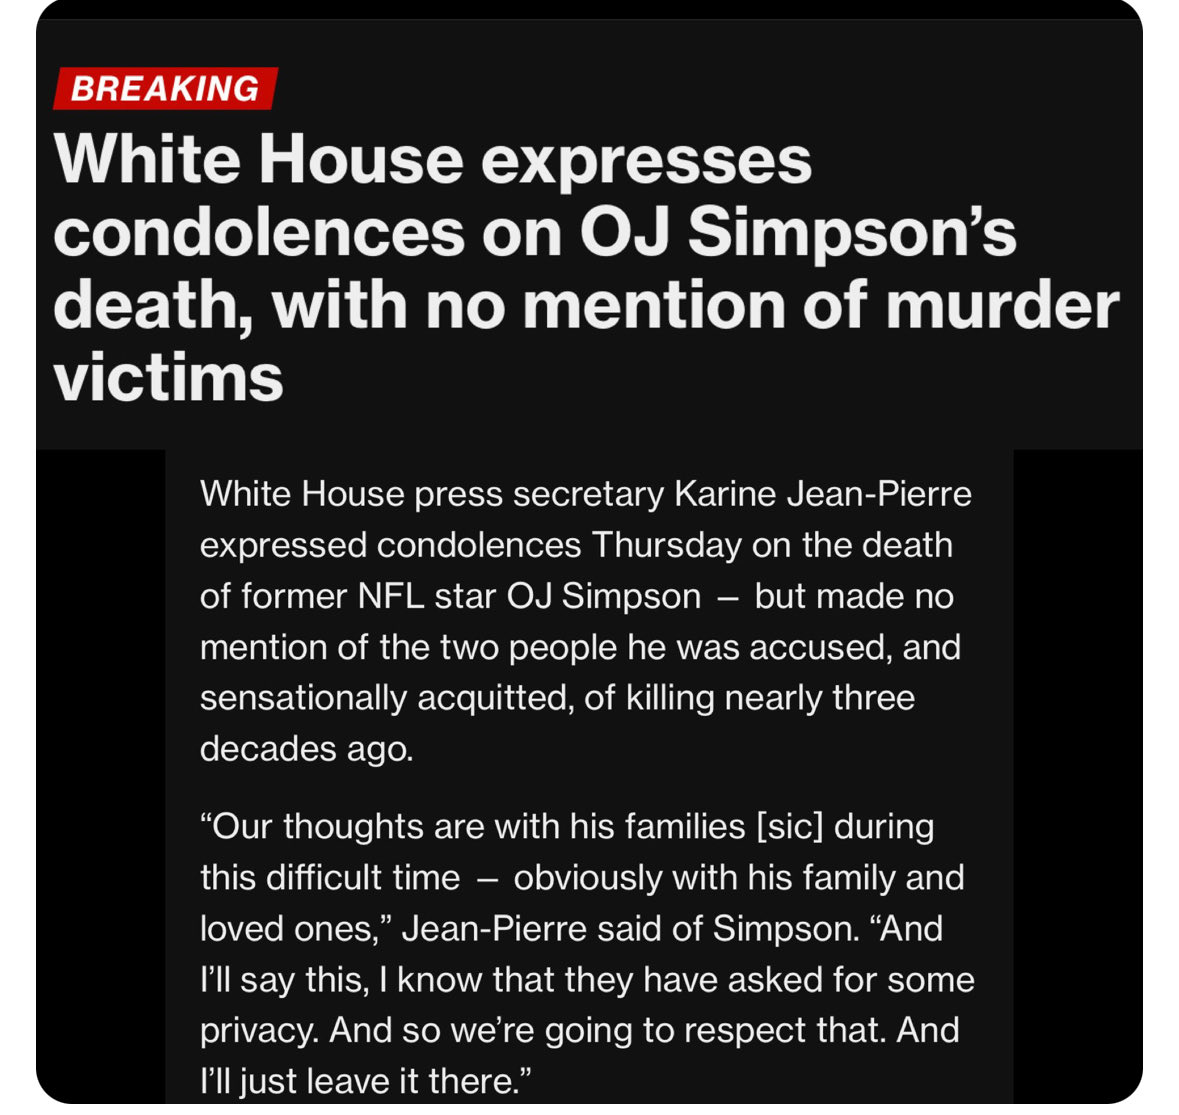 No. Hell no. Not only shouldn’t the White House “express condolences” on OJ’s death, they shouldn’t be commenting upon it AT ALL. Just no.